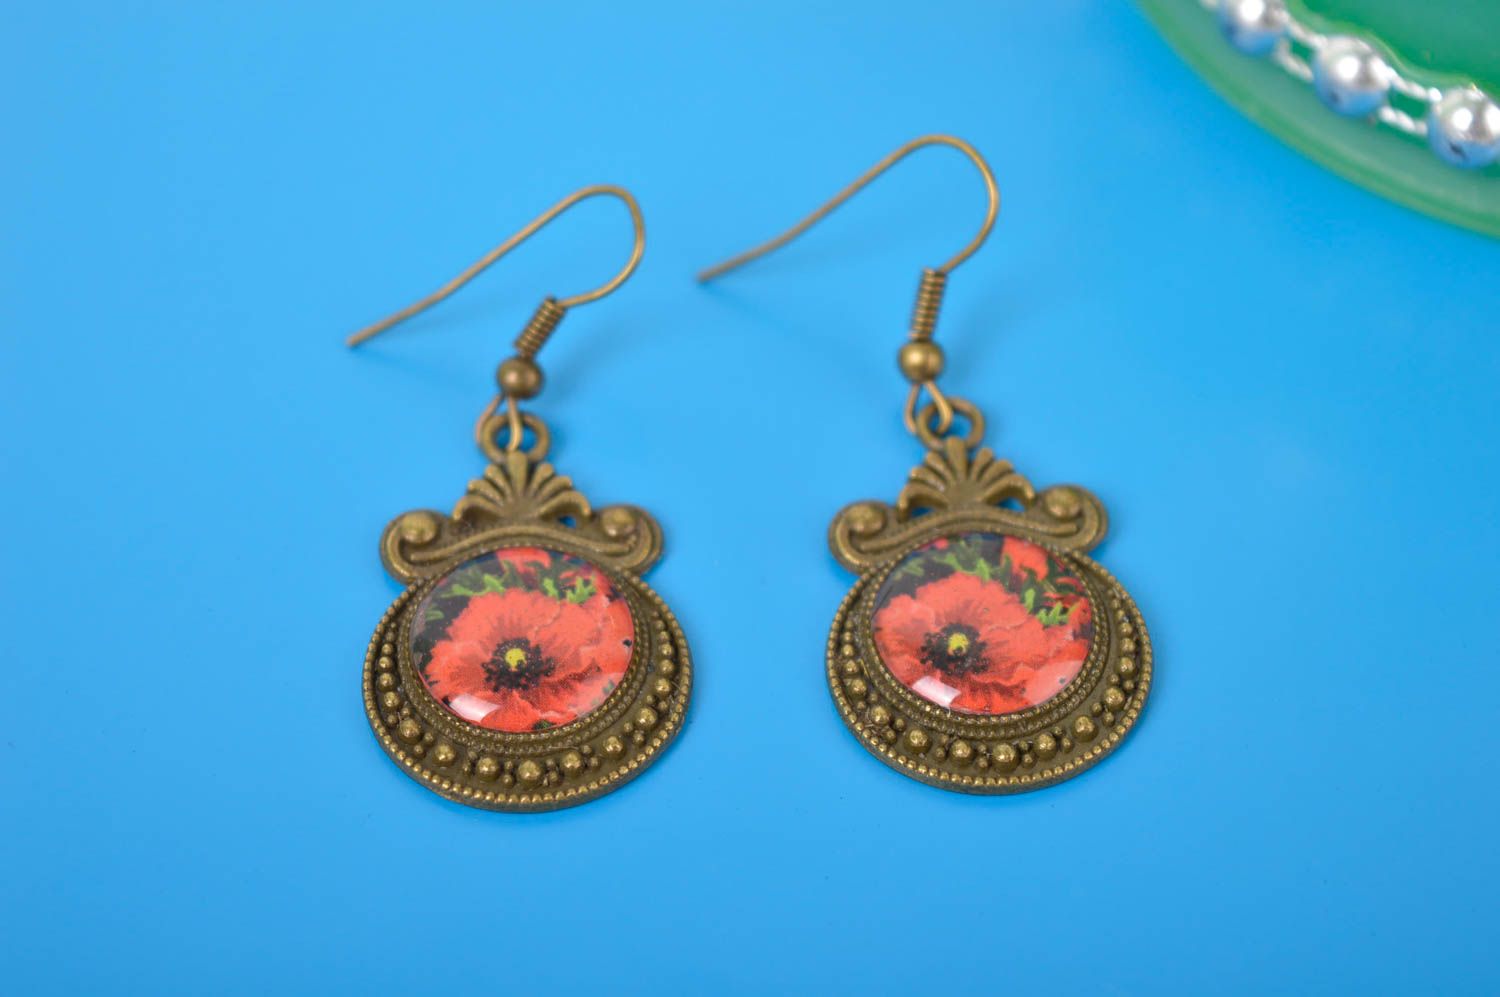 Handmade earrings with charms unusual accessory designer jewelry gift ideas photo 1